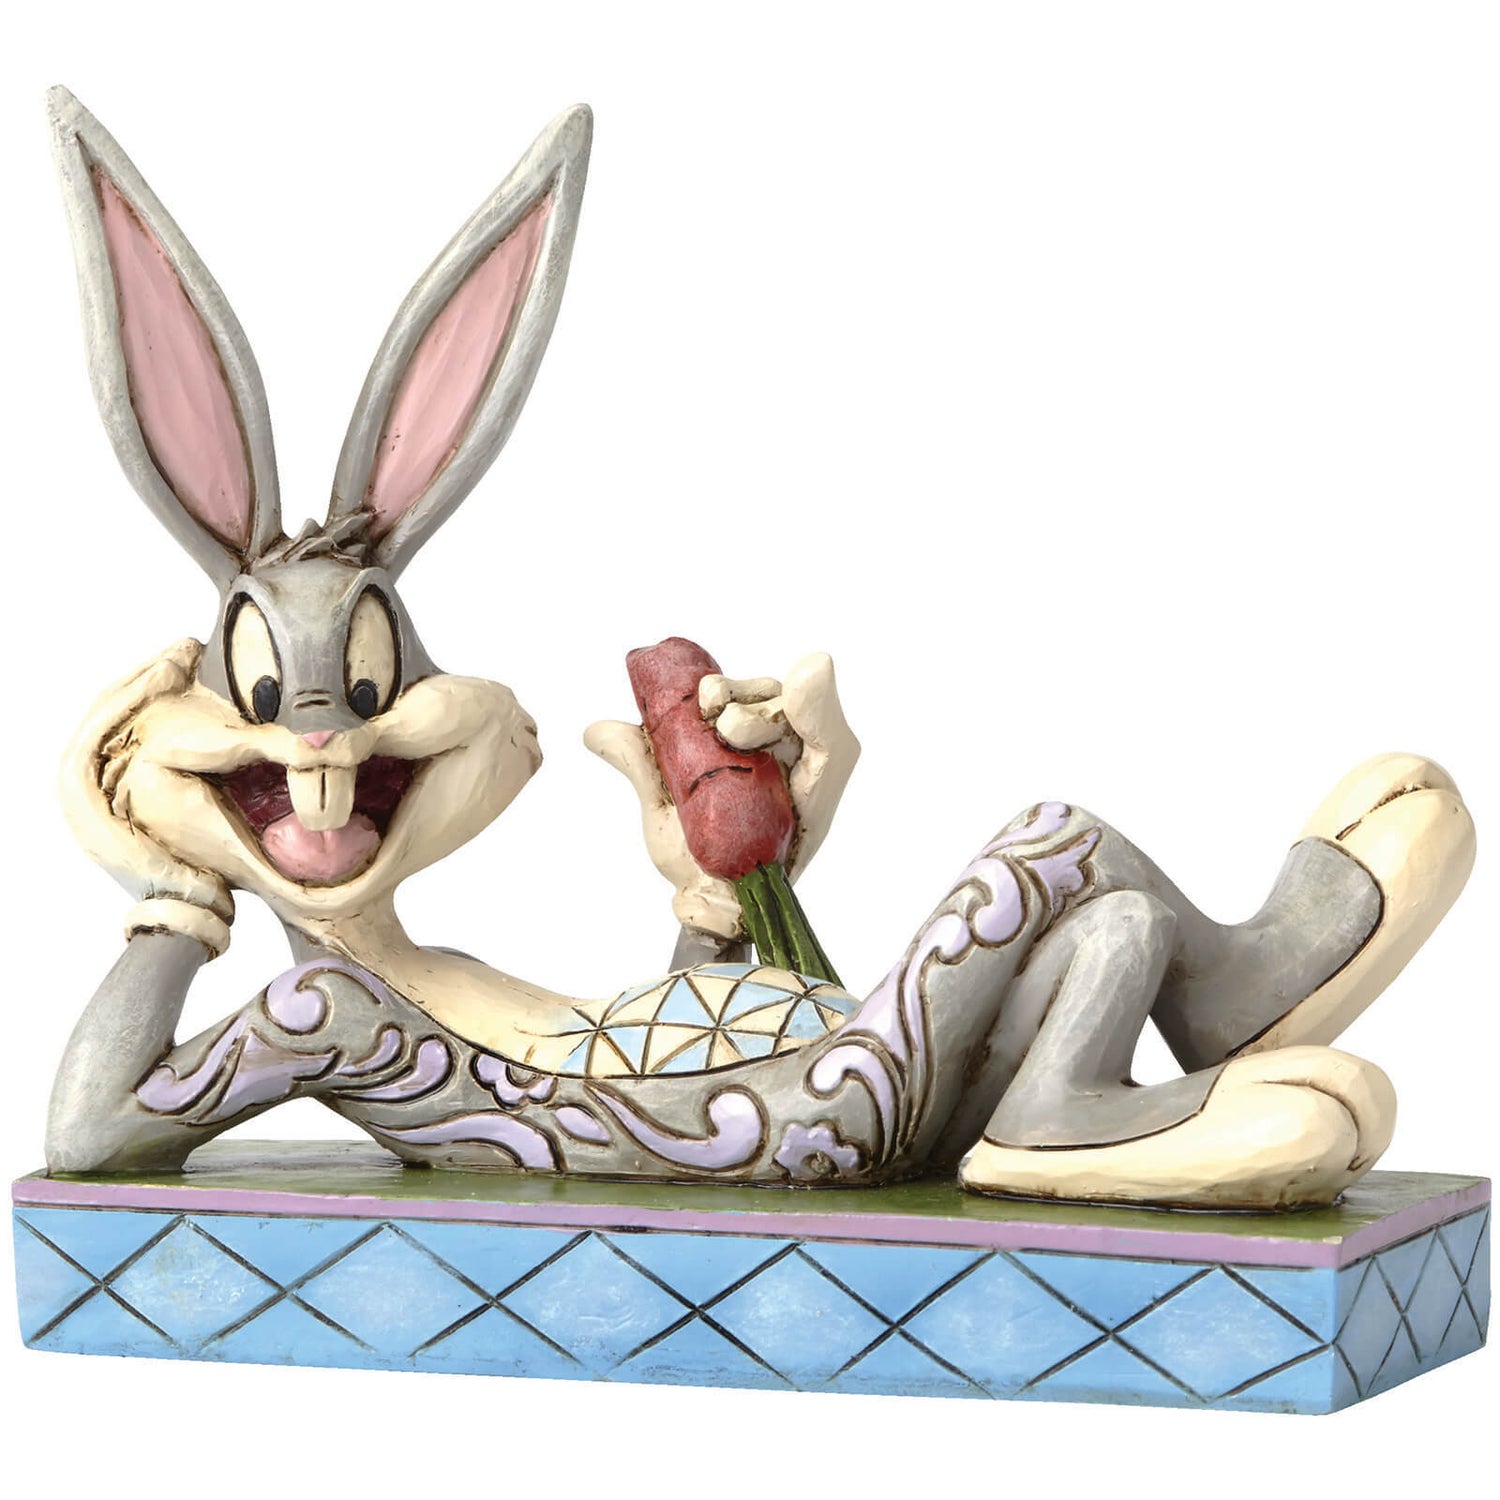 Looney Tunes by Jim Shore 'Cool as a Carrot' Bugs Bunny Figurine